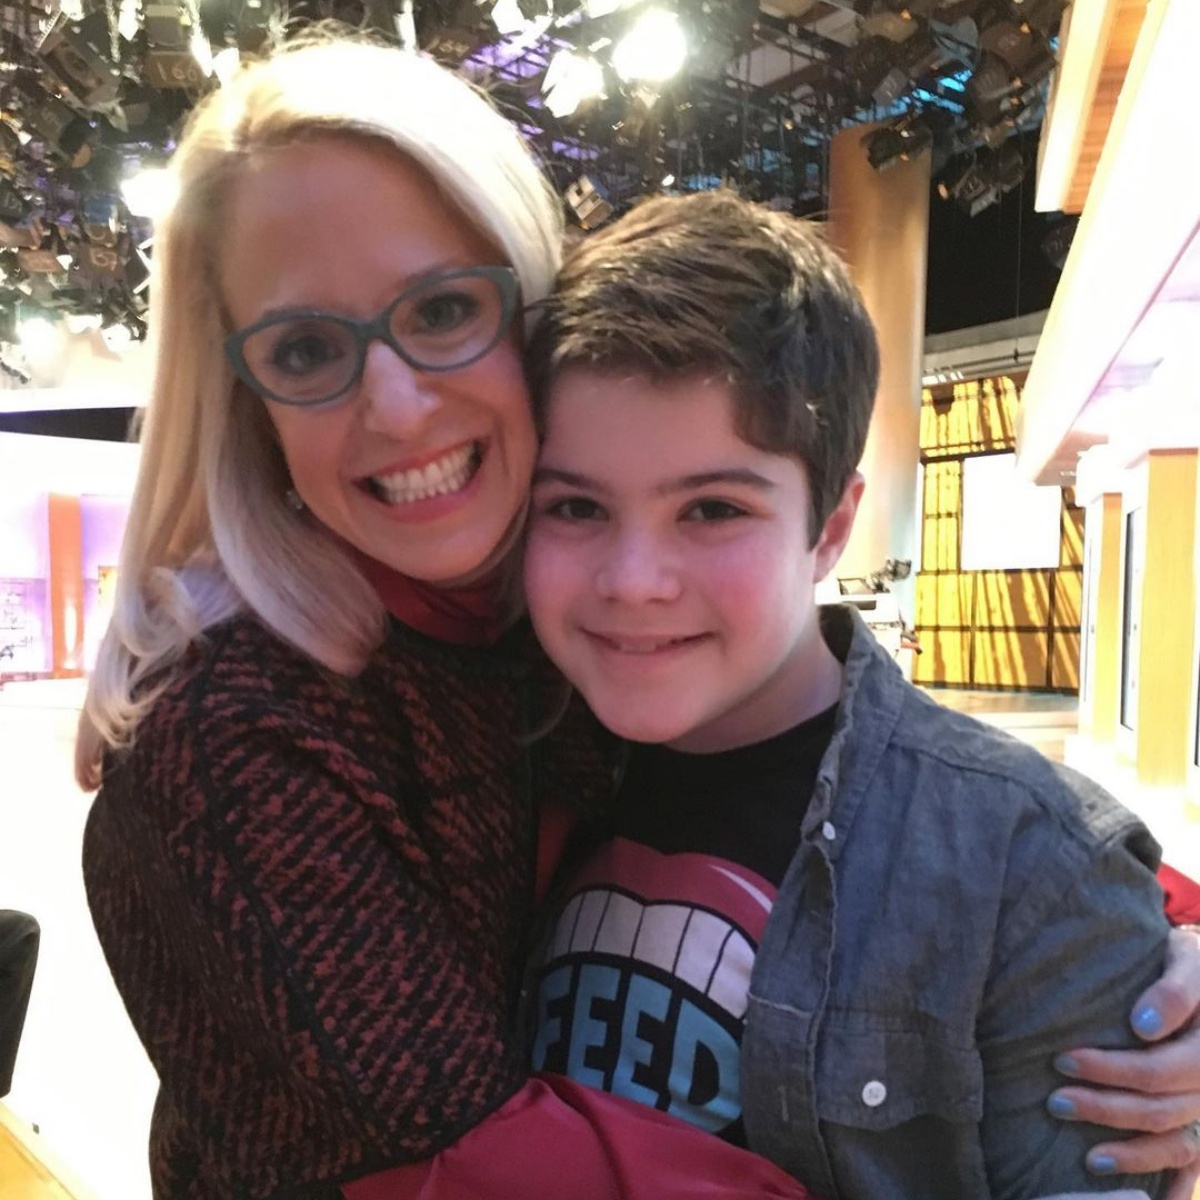 The son of the TV presenter, Dr. Laura Berman, died at 16 after an apparent overdose